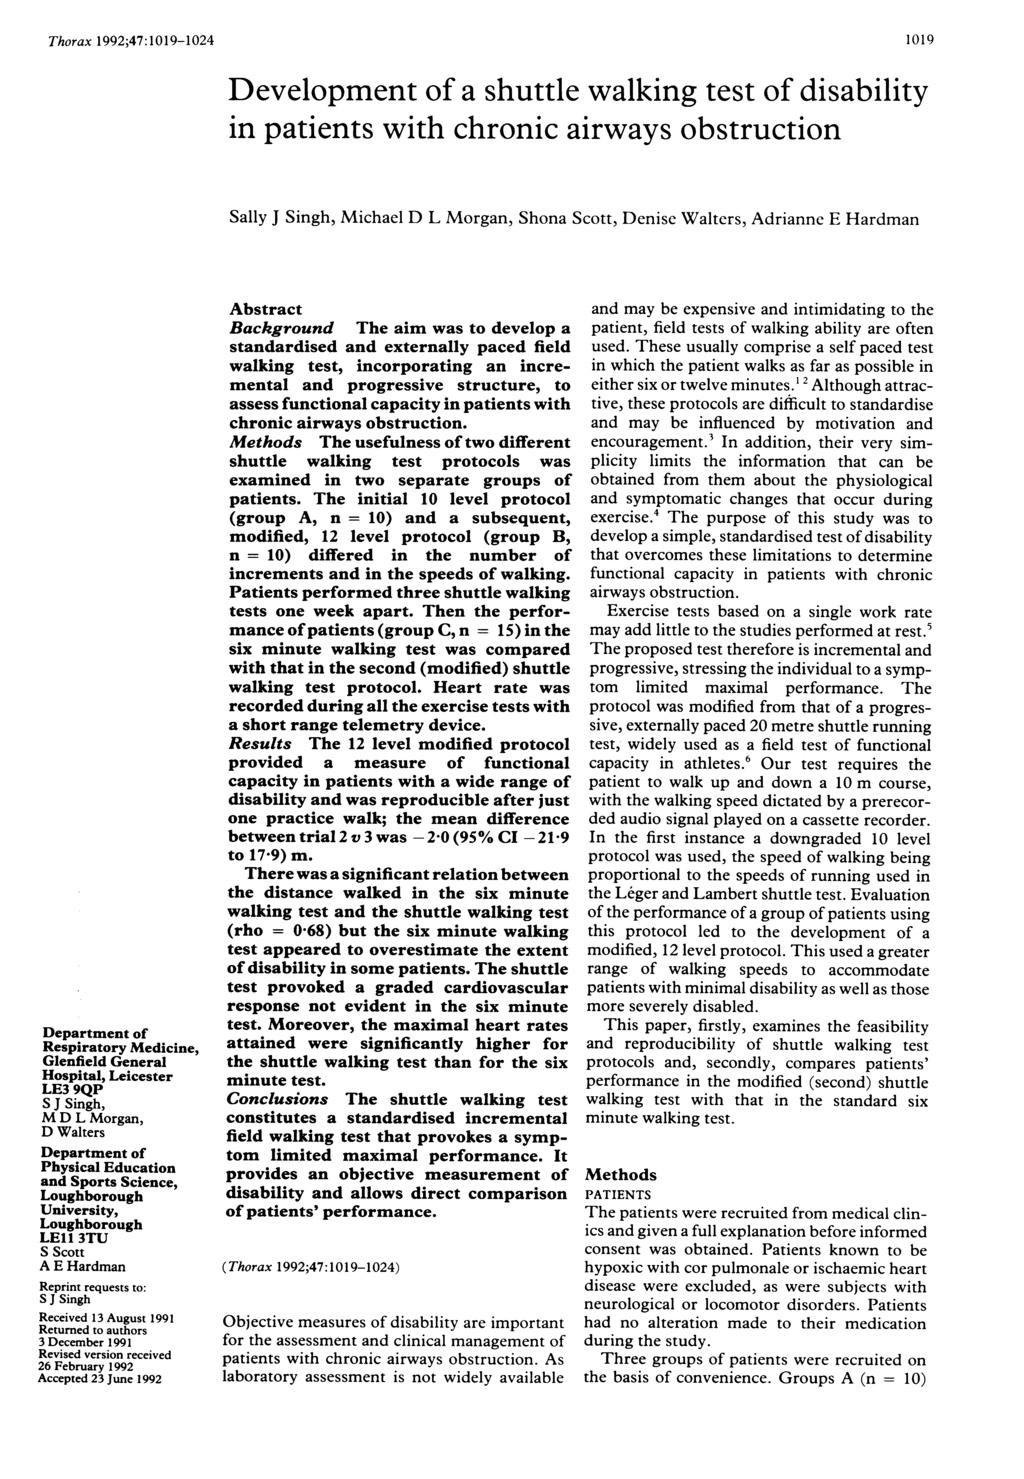 Thorax 1992;47:119-124 Department of Respiratory Medicine, Glenfield General Hospital, Leicester LE3 9QP S J Singh, M D L Morgan, D Walters Department of Physical Education and Sports Science,